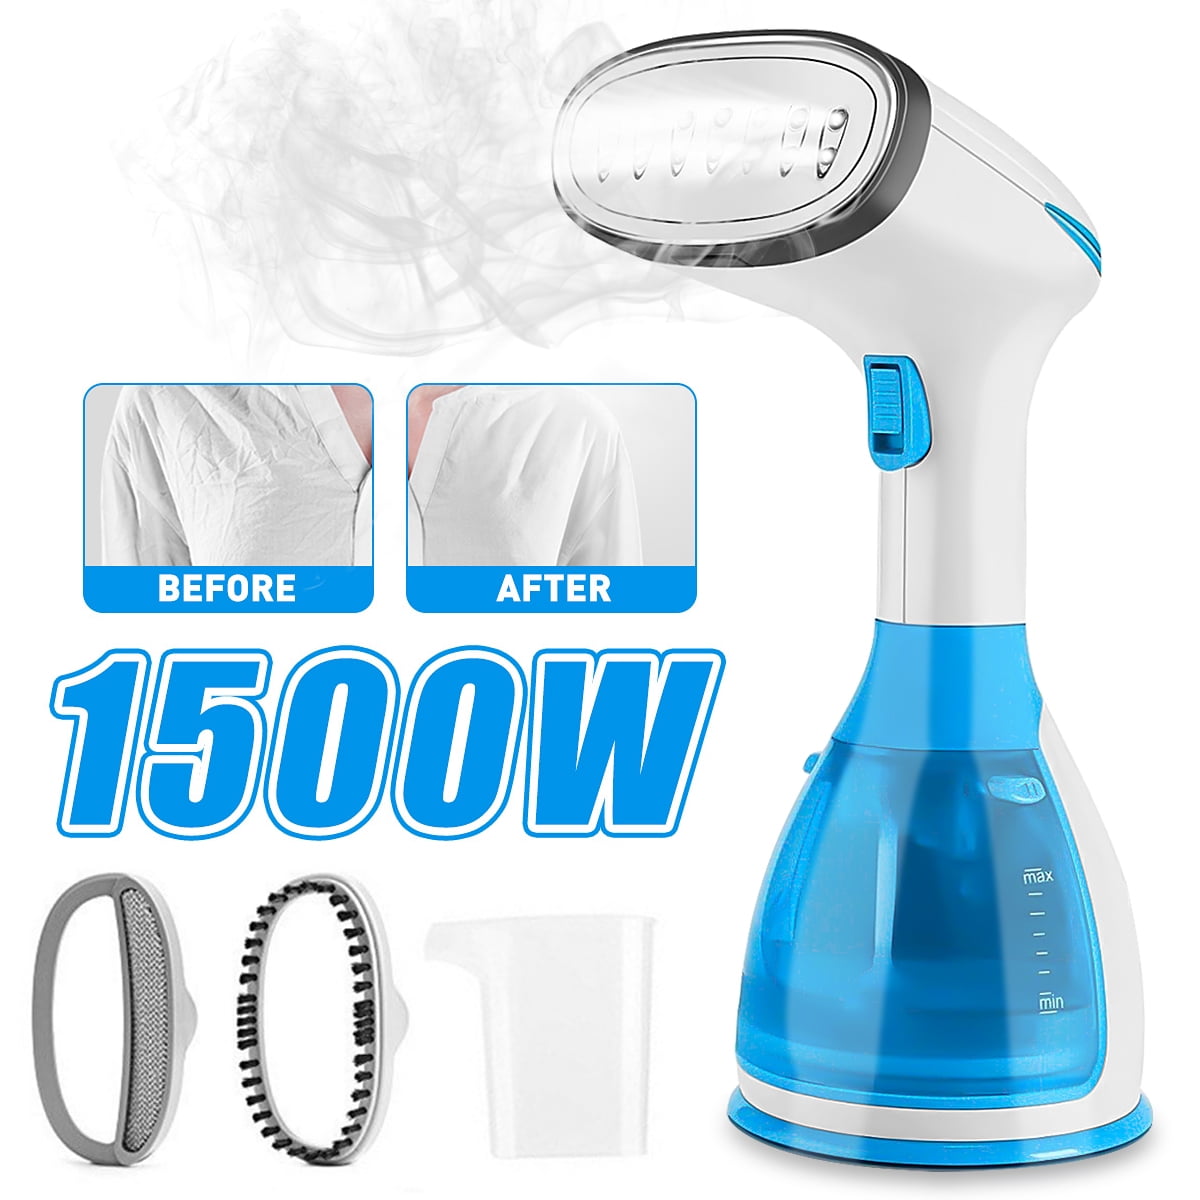 Clothes/Portable Steam Iron Home Handheld Fabric Laundry Steamer Brush Travel 